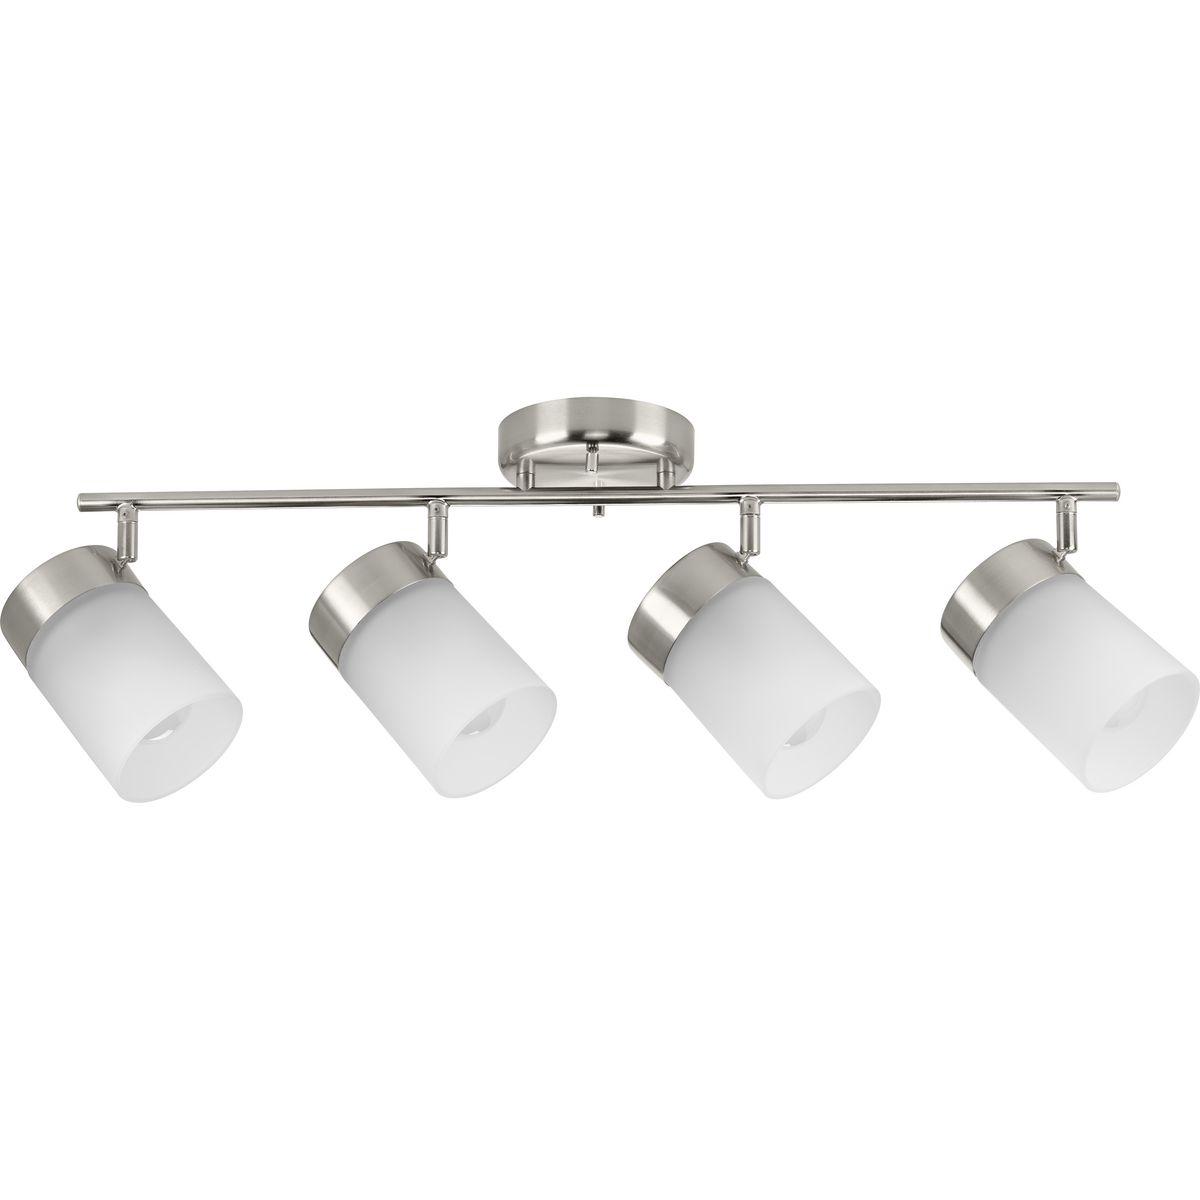 Hubbell P900012-009 Infuse an abundance of sophisticated versatile light to an commercial or residential setting with this brushed nickel four-head track light fixture. Multi-directional lamp heads provide design flexibility and illuminate typically hard-to-reach areas. The 